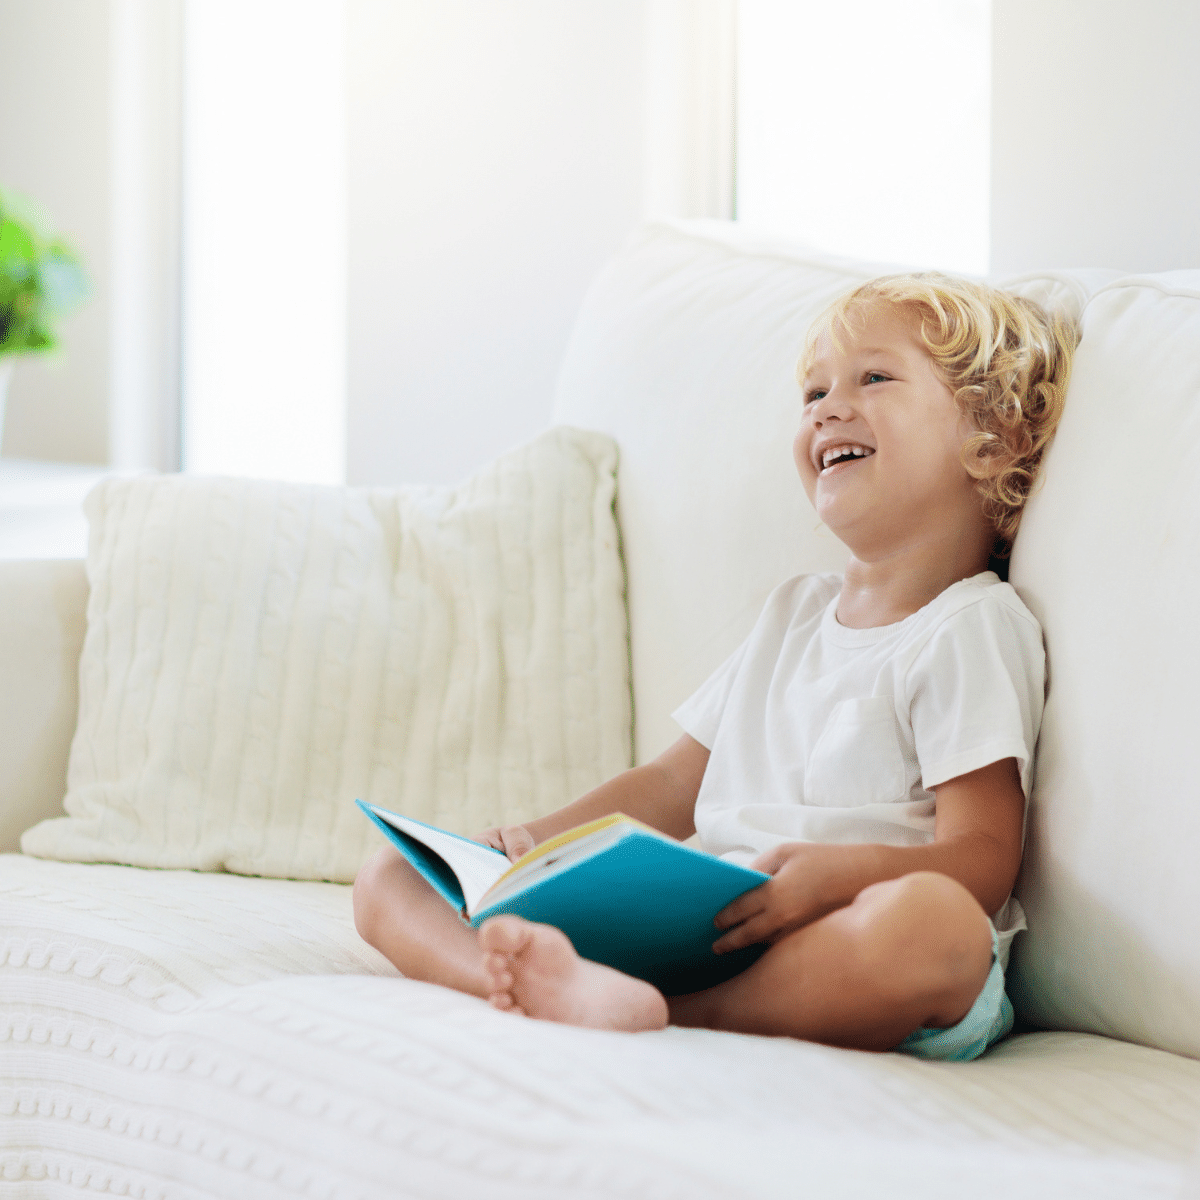 Child sitting on a couch laughing while reading a book